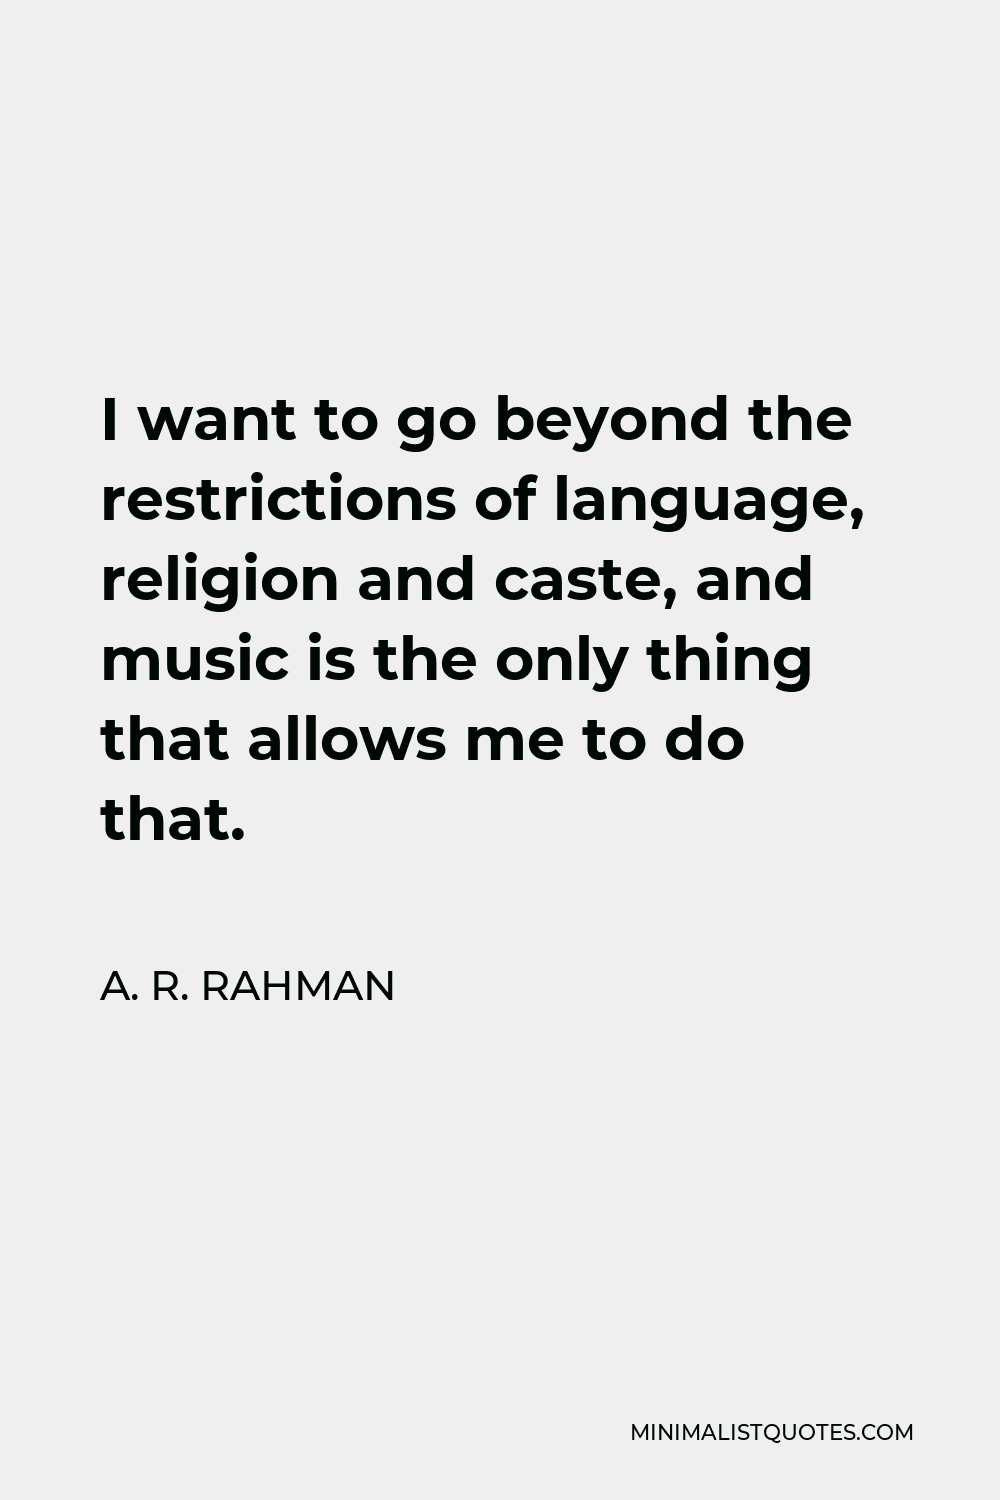 A. R. Rahman Quote - I want to go beyond the restrictions of language, religion and caste, and music is the only thing that allows me to do that.